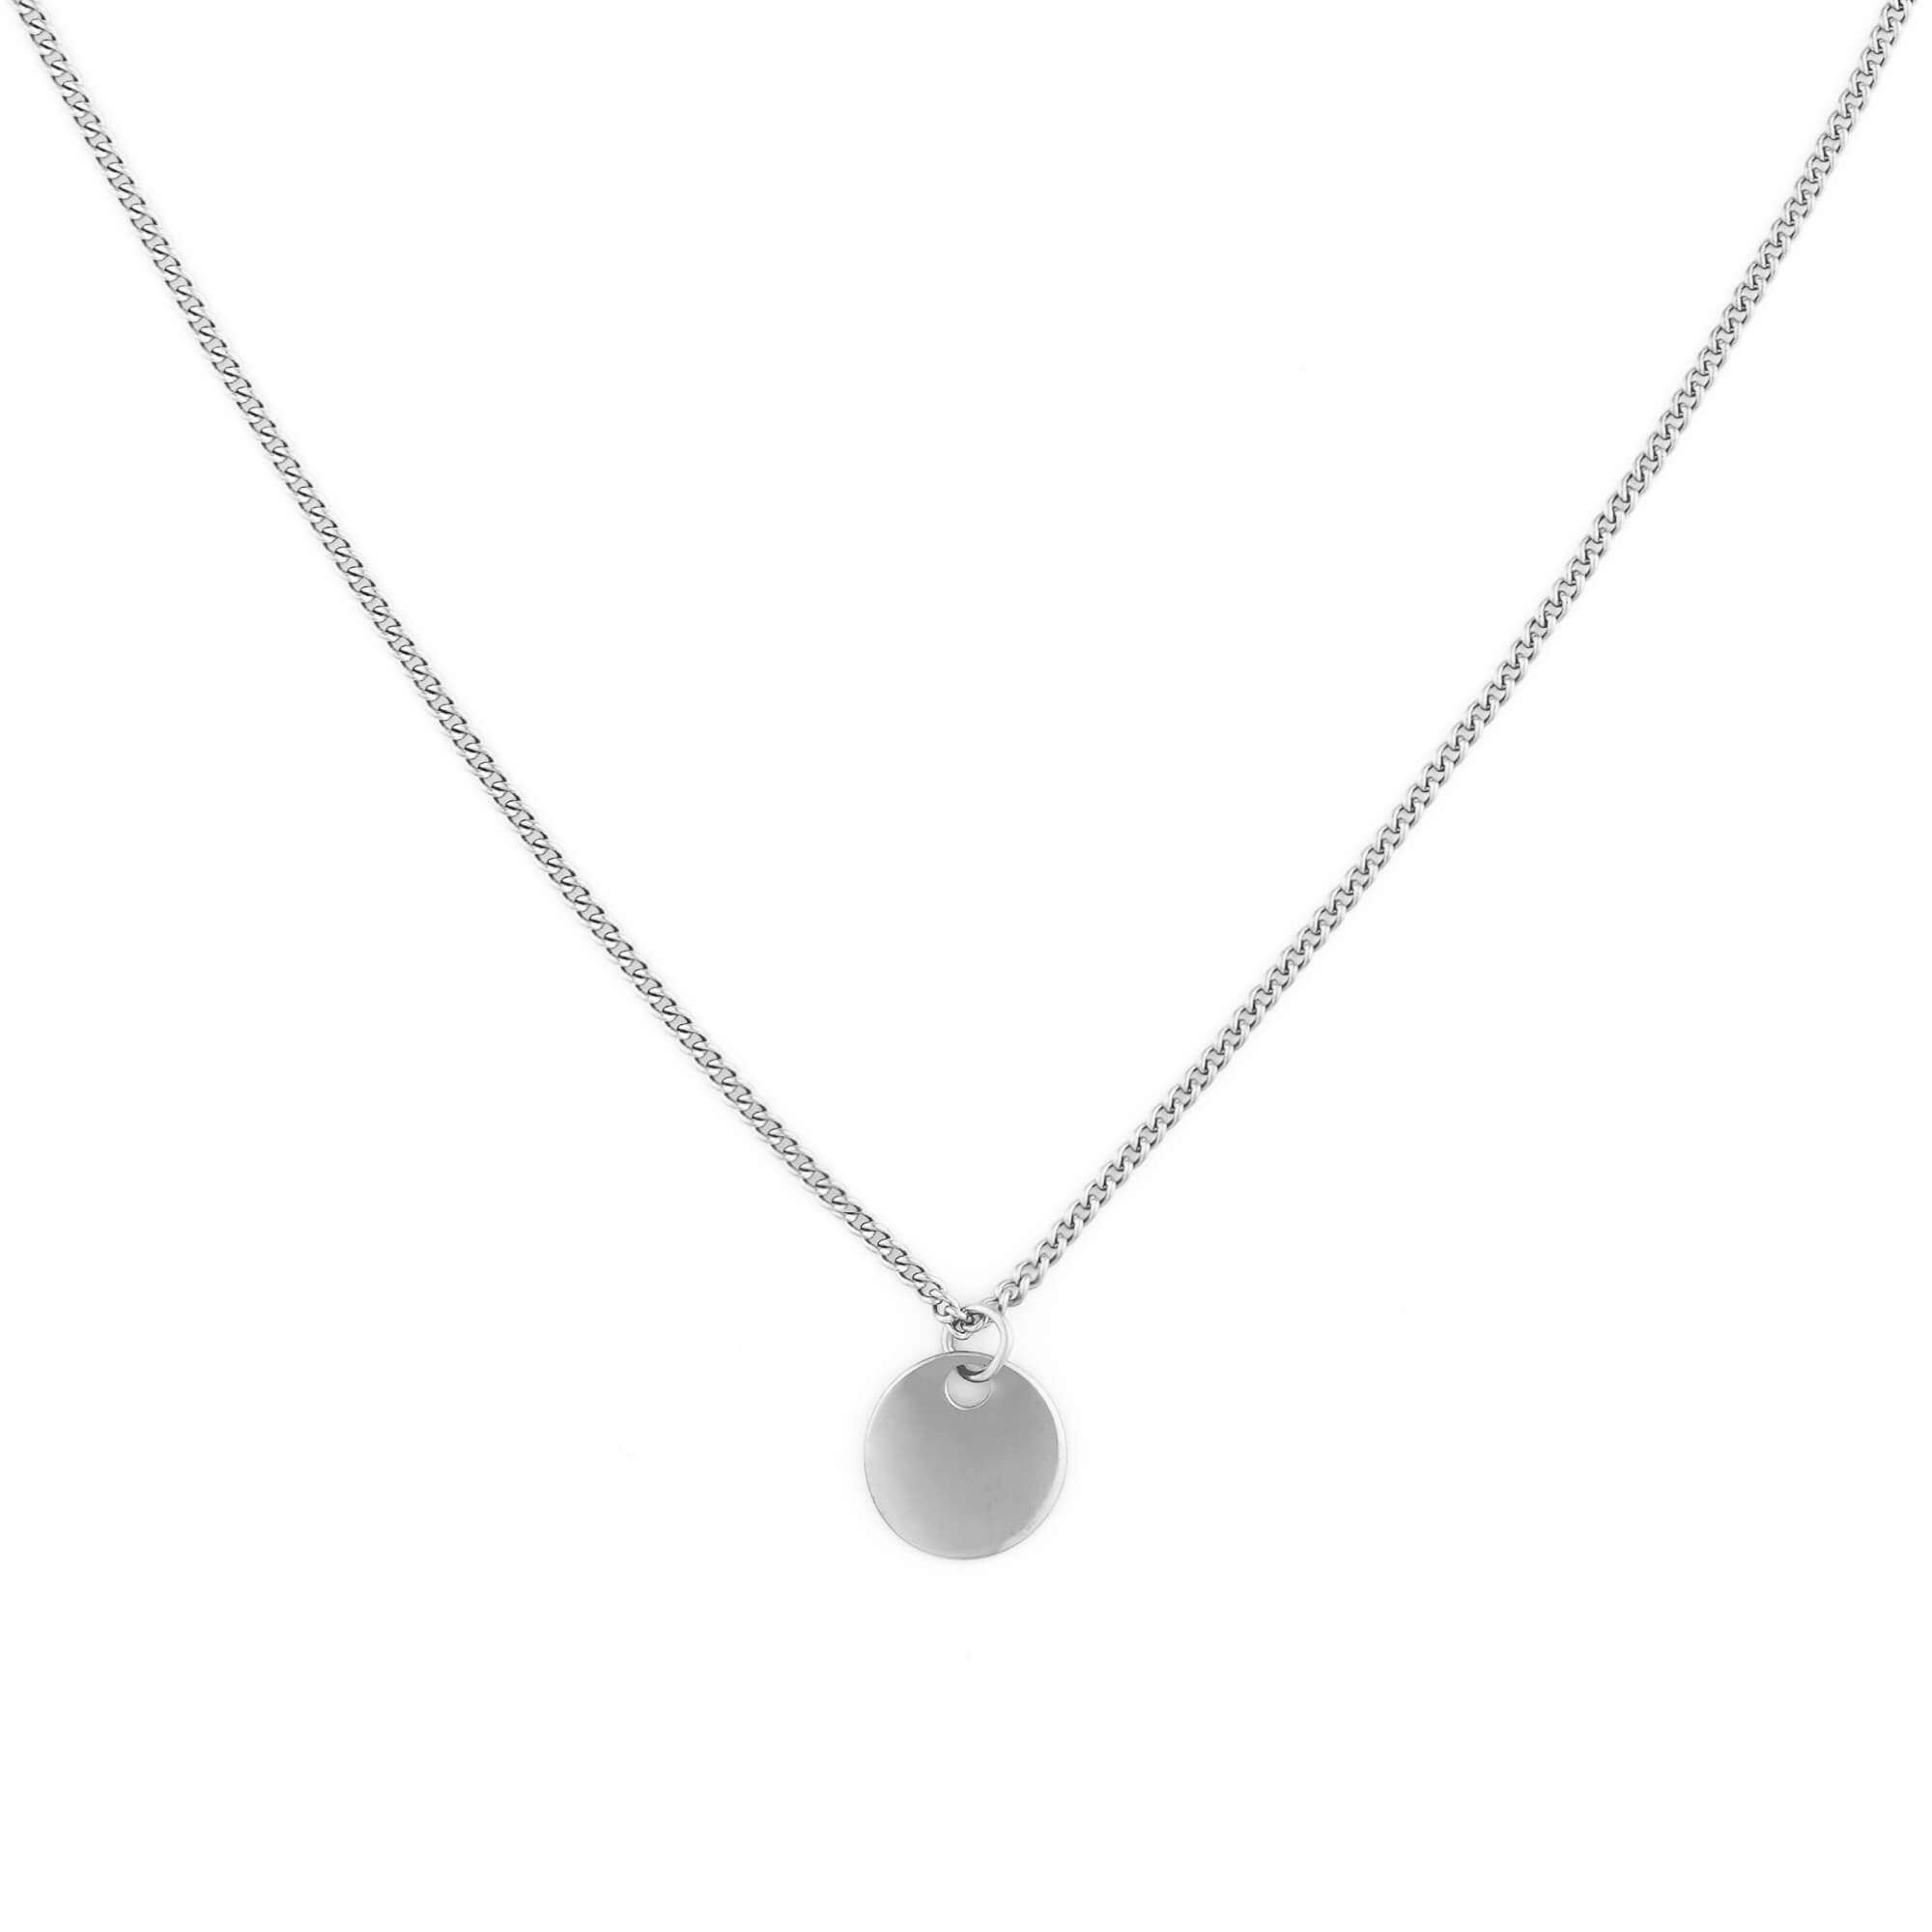 karna round rond small pendant necklace collier pendentif cercle chain 1.5mm mini fj watches stainless steel acier inoxydable women femme silver argent